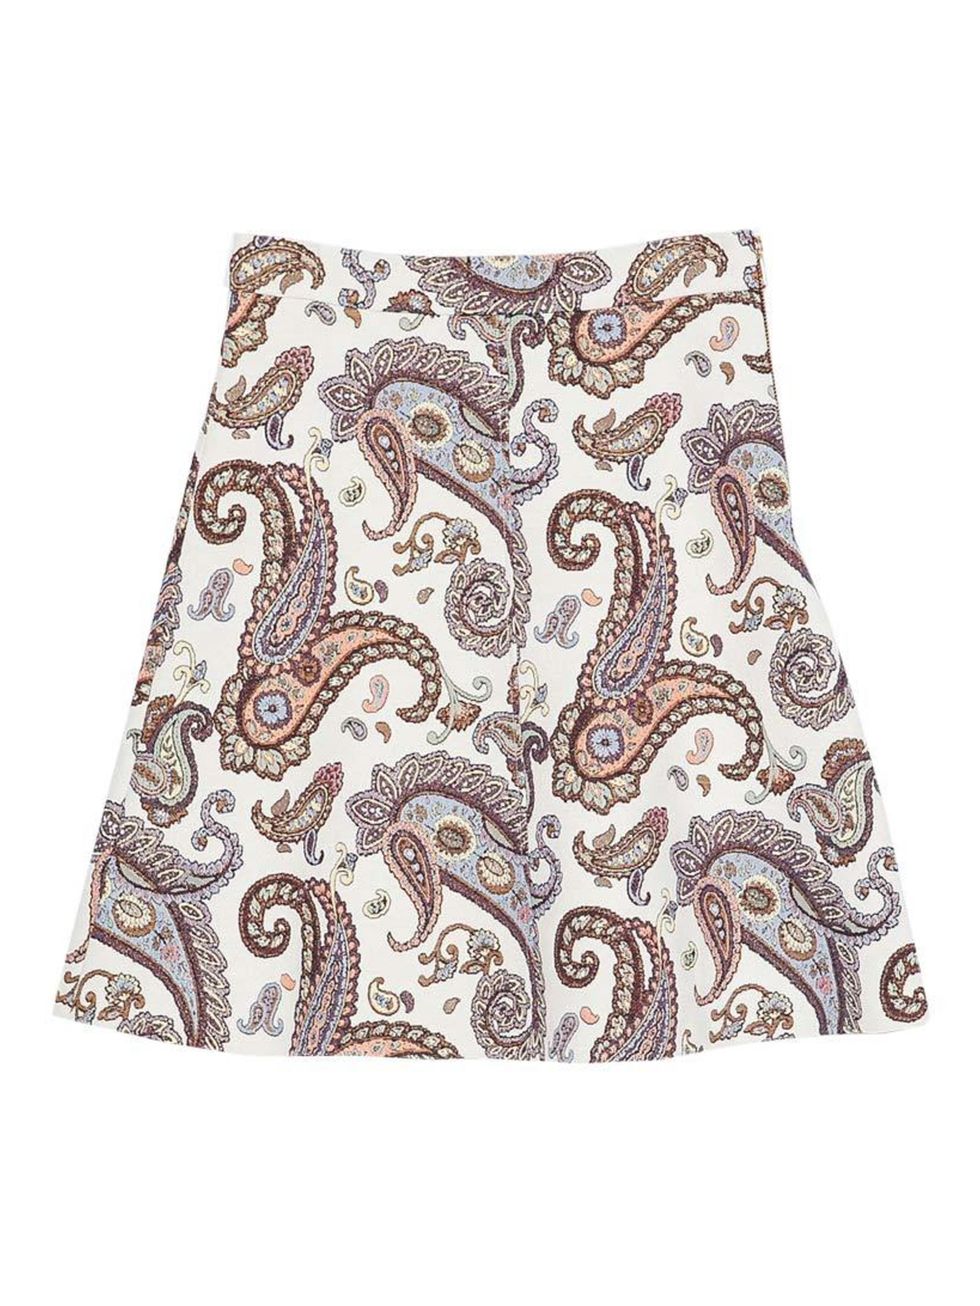 <p>Wear with a cream roll-neck jumper and camel ankle boots.</p>

<p><a href="http://www.zara.com/uk/en/new-this-week/woman/a-line-paisley-skirt-c363008p2446552.html" target="_blank">Zara</a> skirt, £35.99</p>